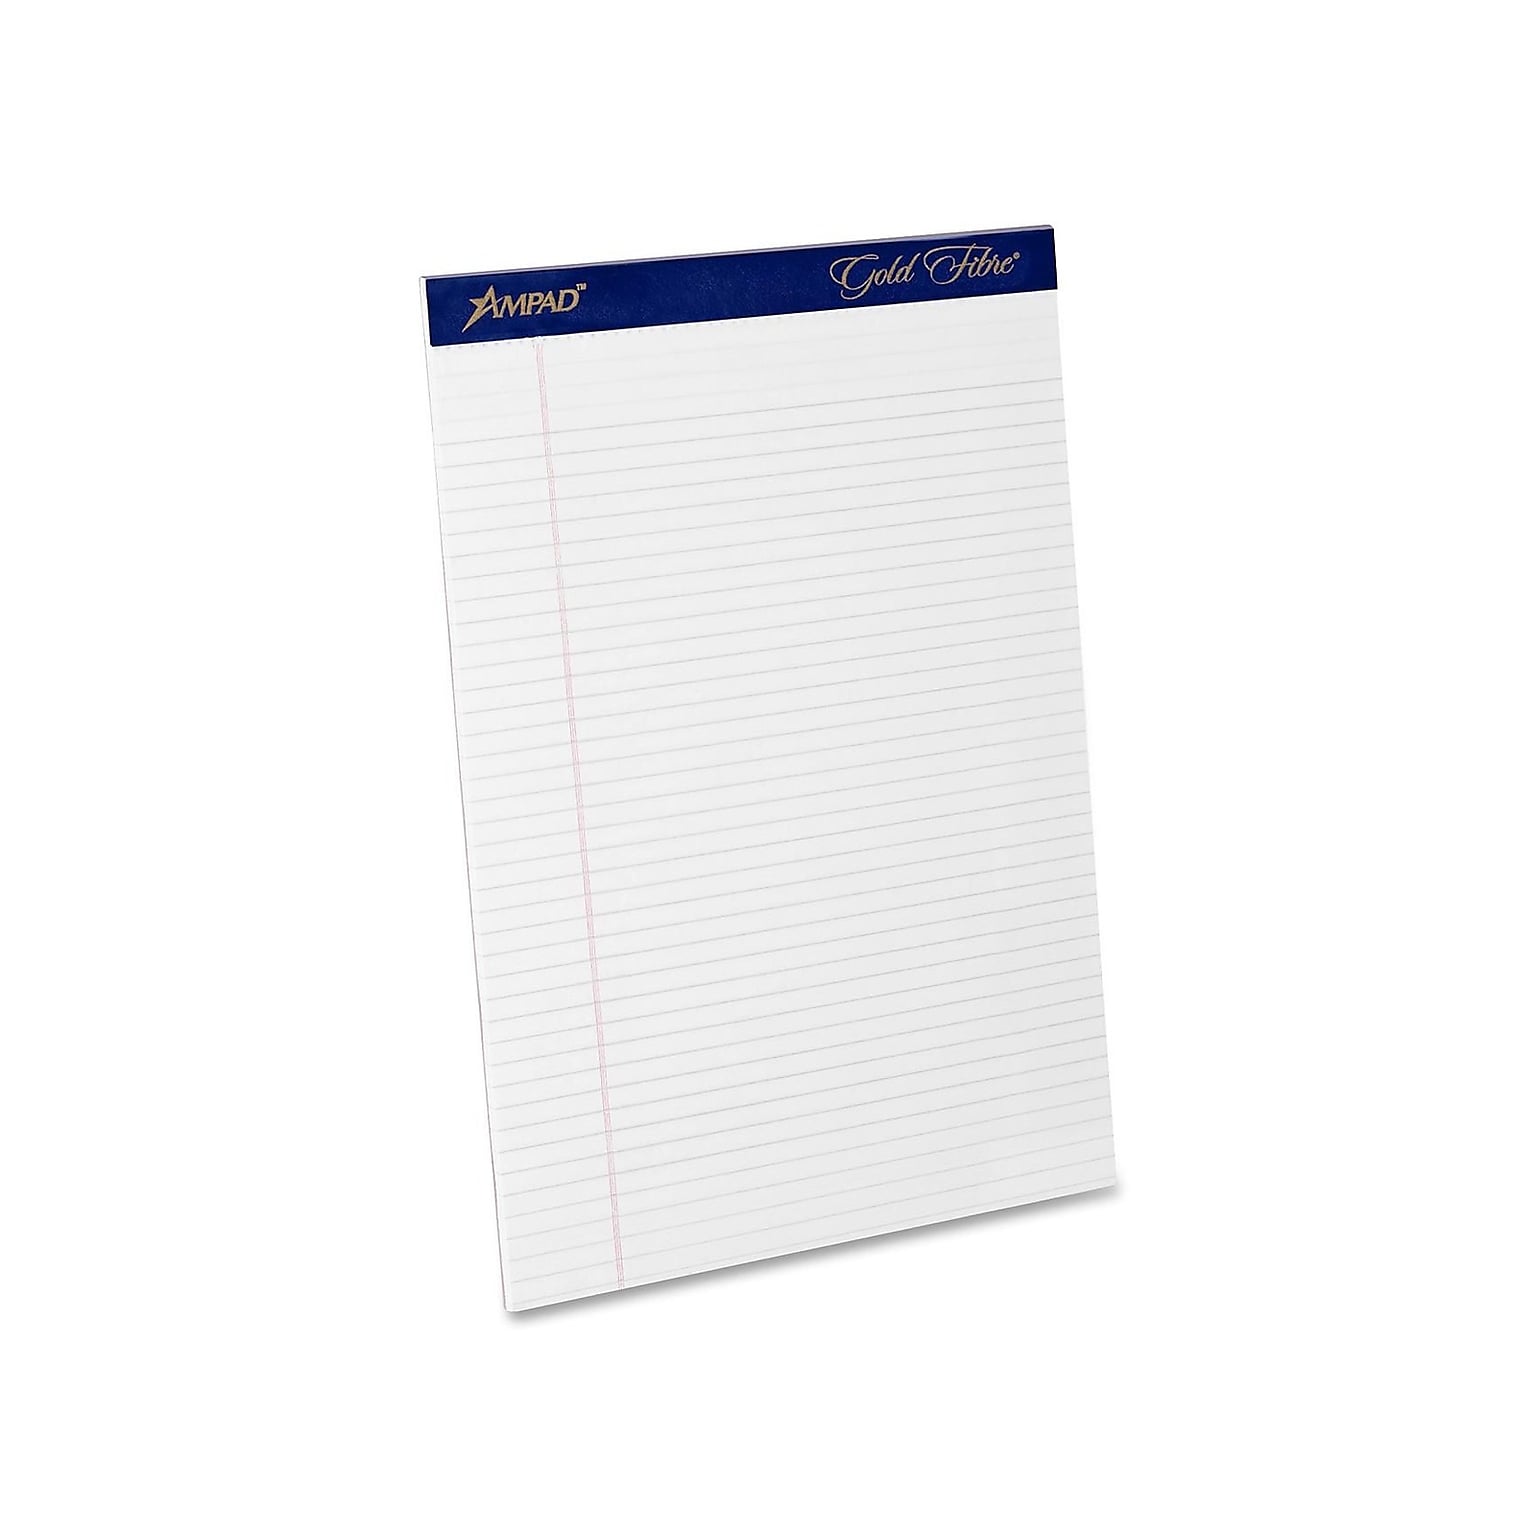 Ampad Gold Fibre Notepads, 8.5 x 11.75, Narrow Ruled, White, 50 Sheets/Pad, 12 Pads/Pack (TOP 20-072)